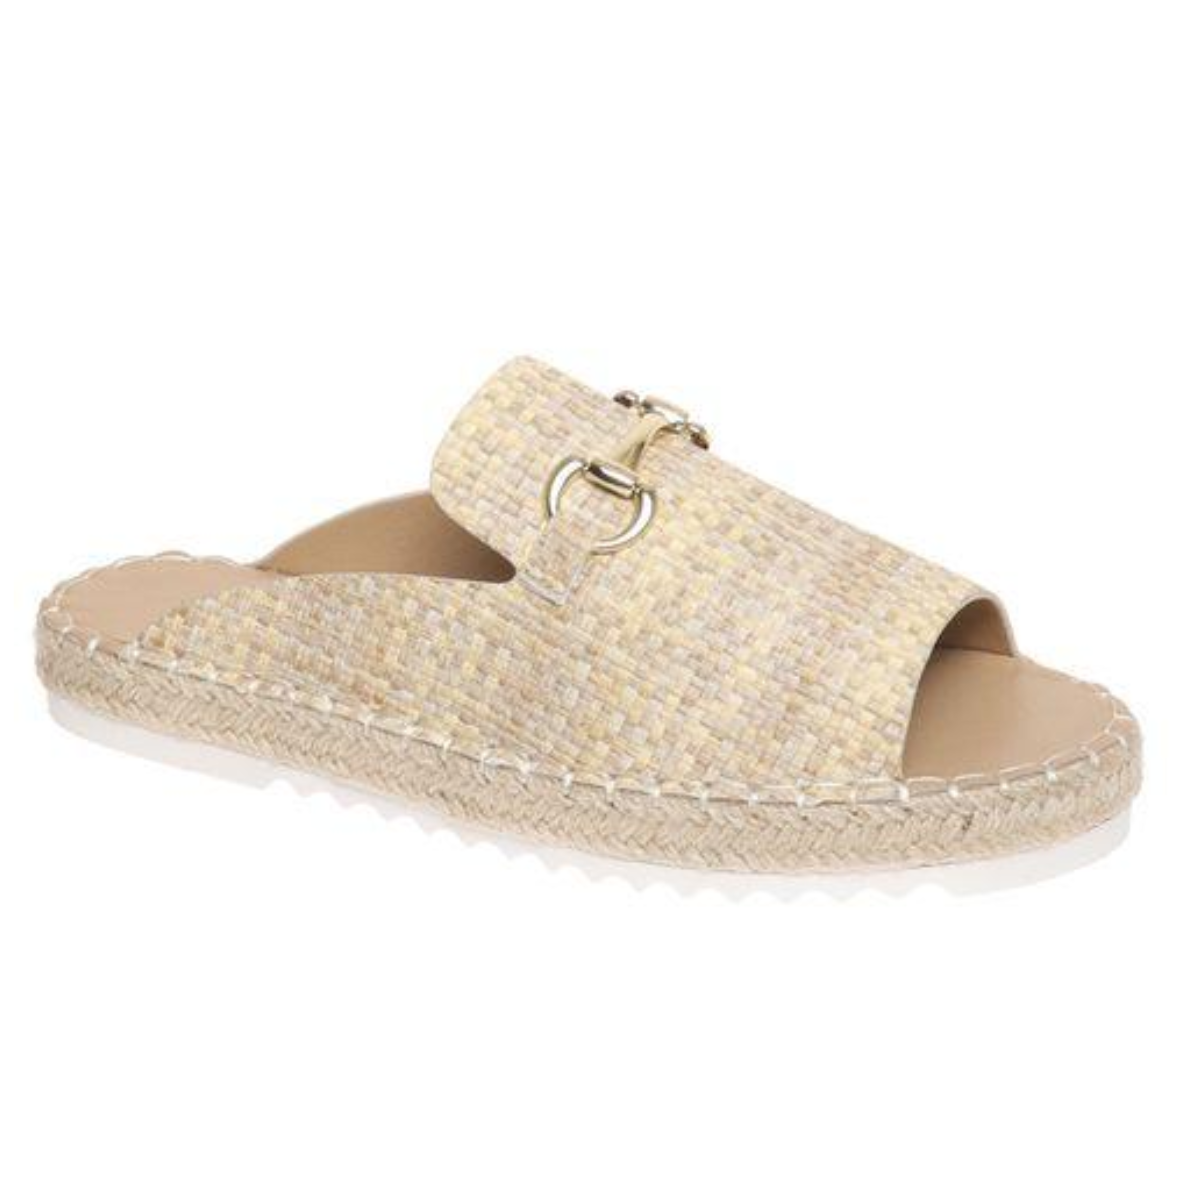 A unique OLEM SHOE CORP women's espadrille slipper, Cordell in Natural Combo, with gold hardware trim and an easy open back mule.